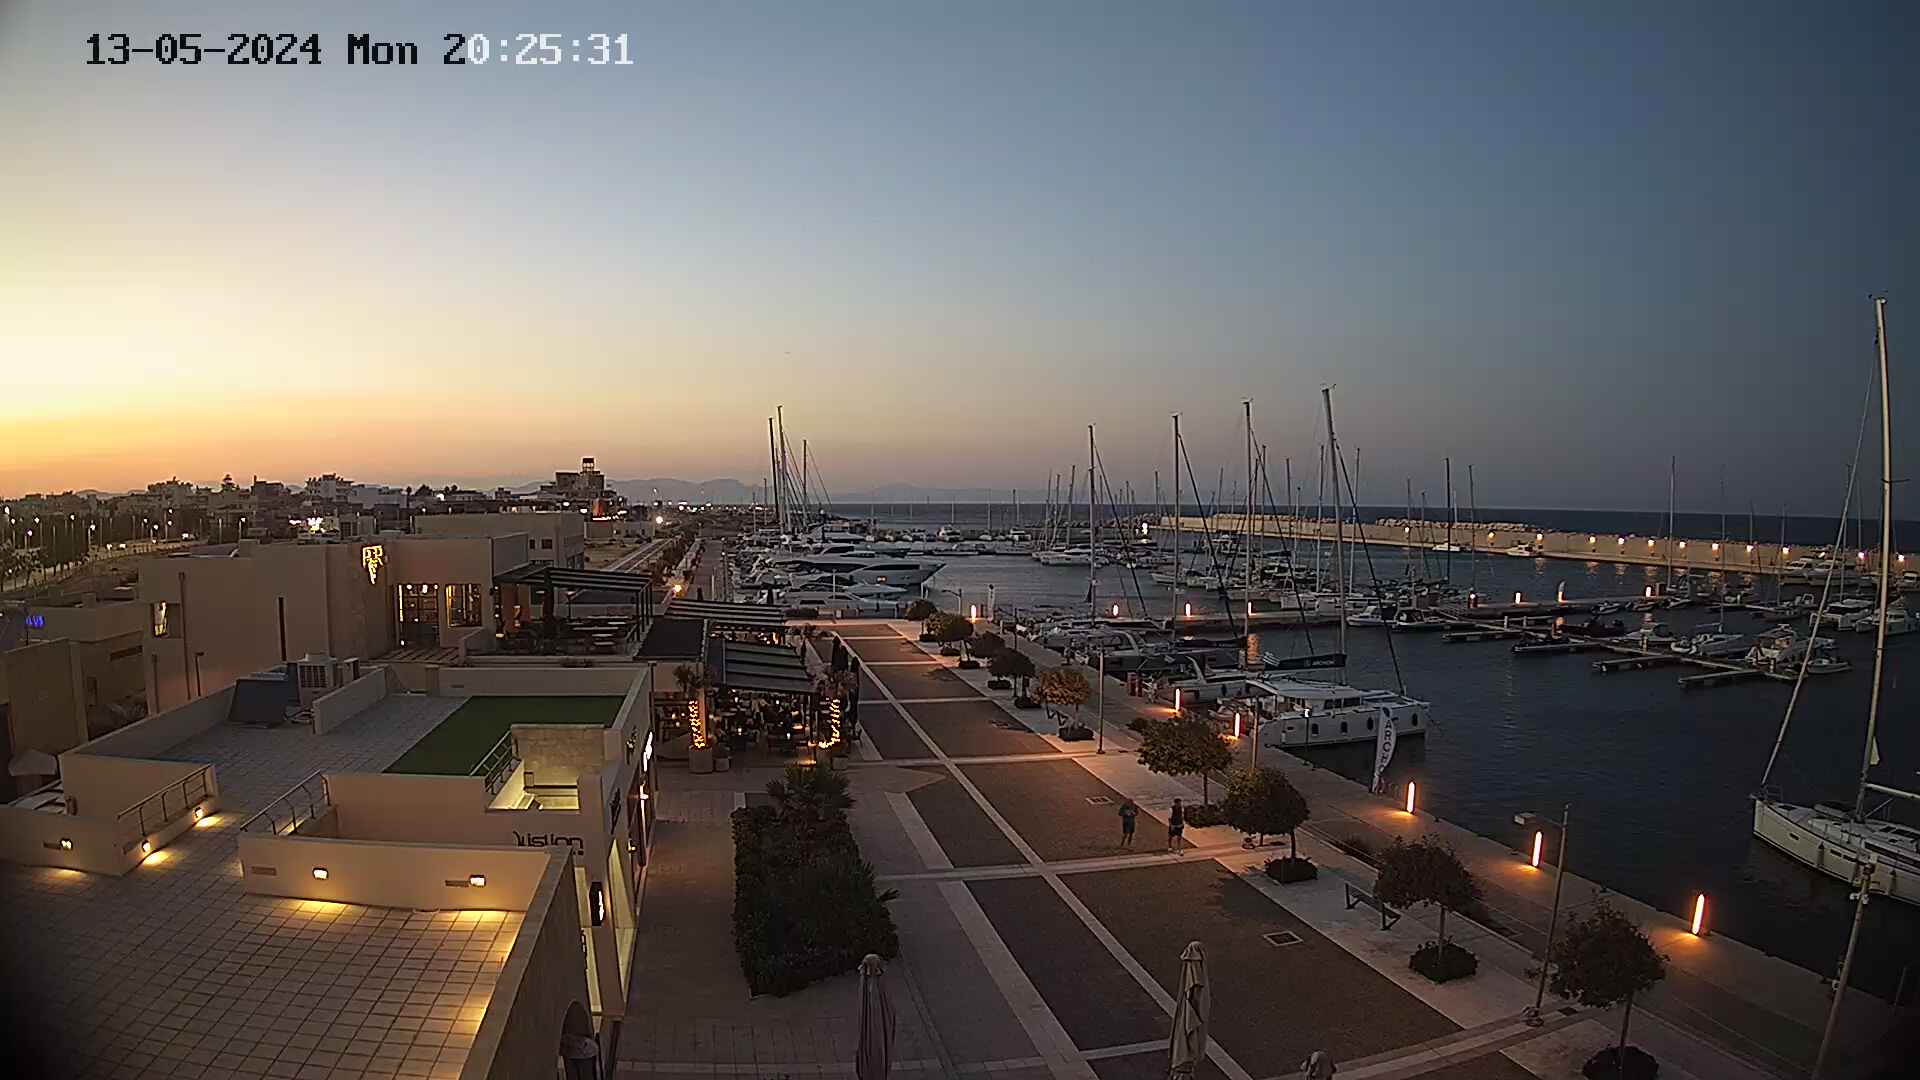 Rhodos Stadt Mo. 20:26